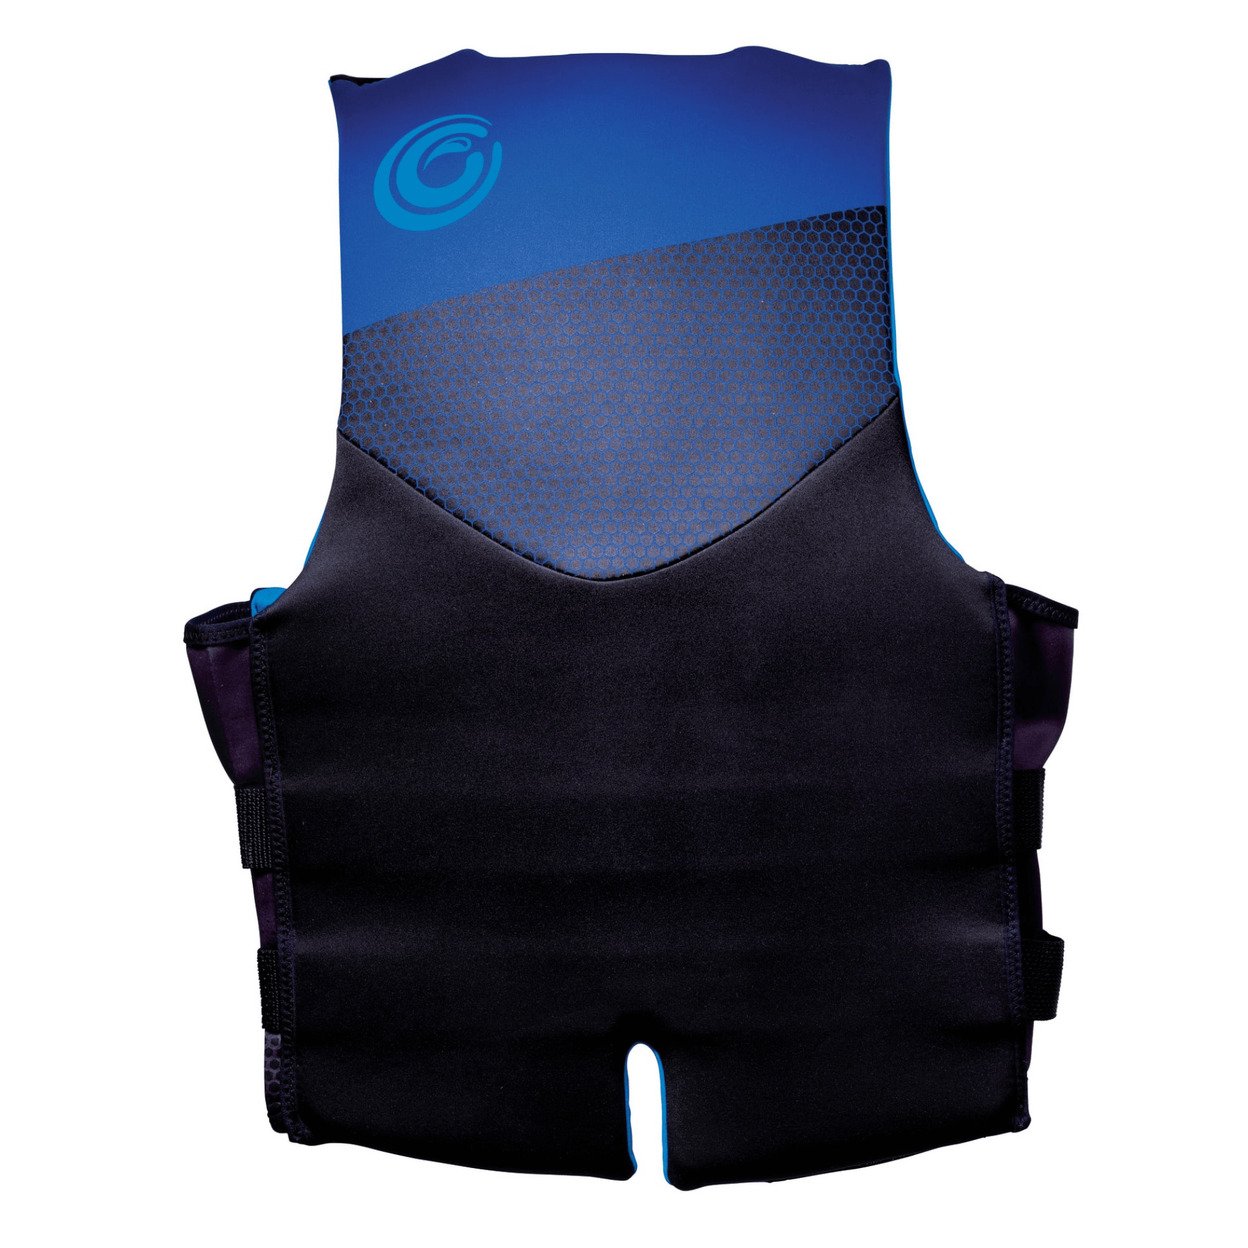 WOW Sports Feel Good Dual Sized Evoprene PFD Personal Floatation Device For Adults - Blue, Medium / Large